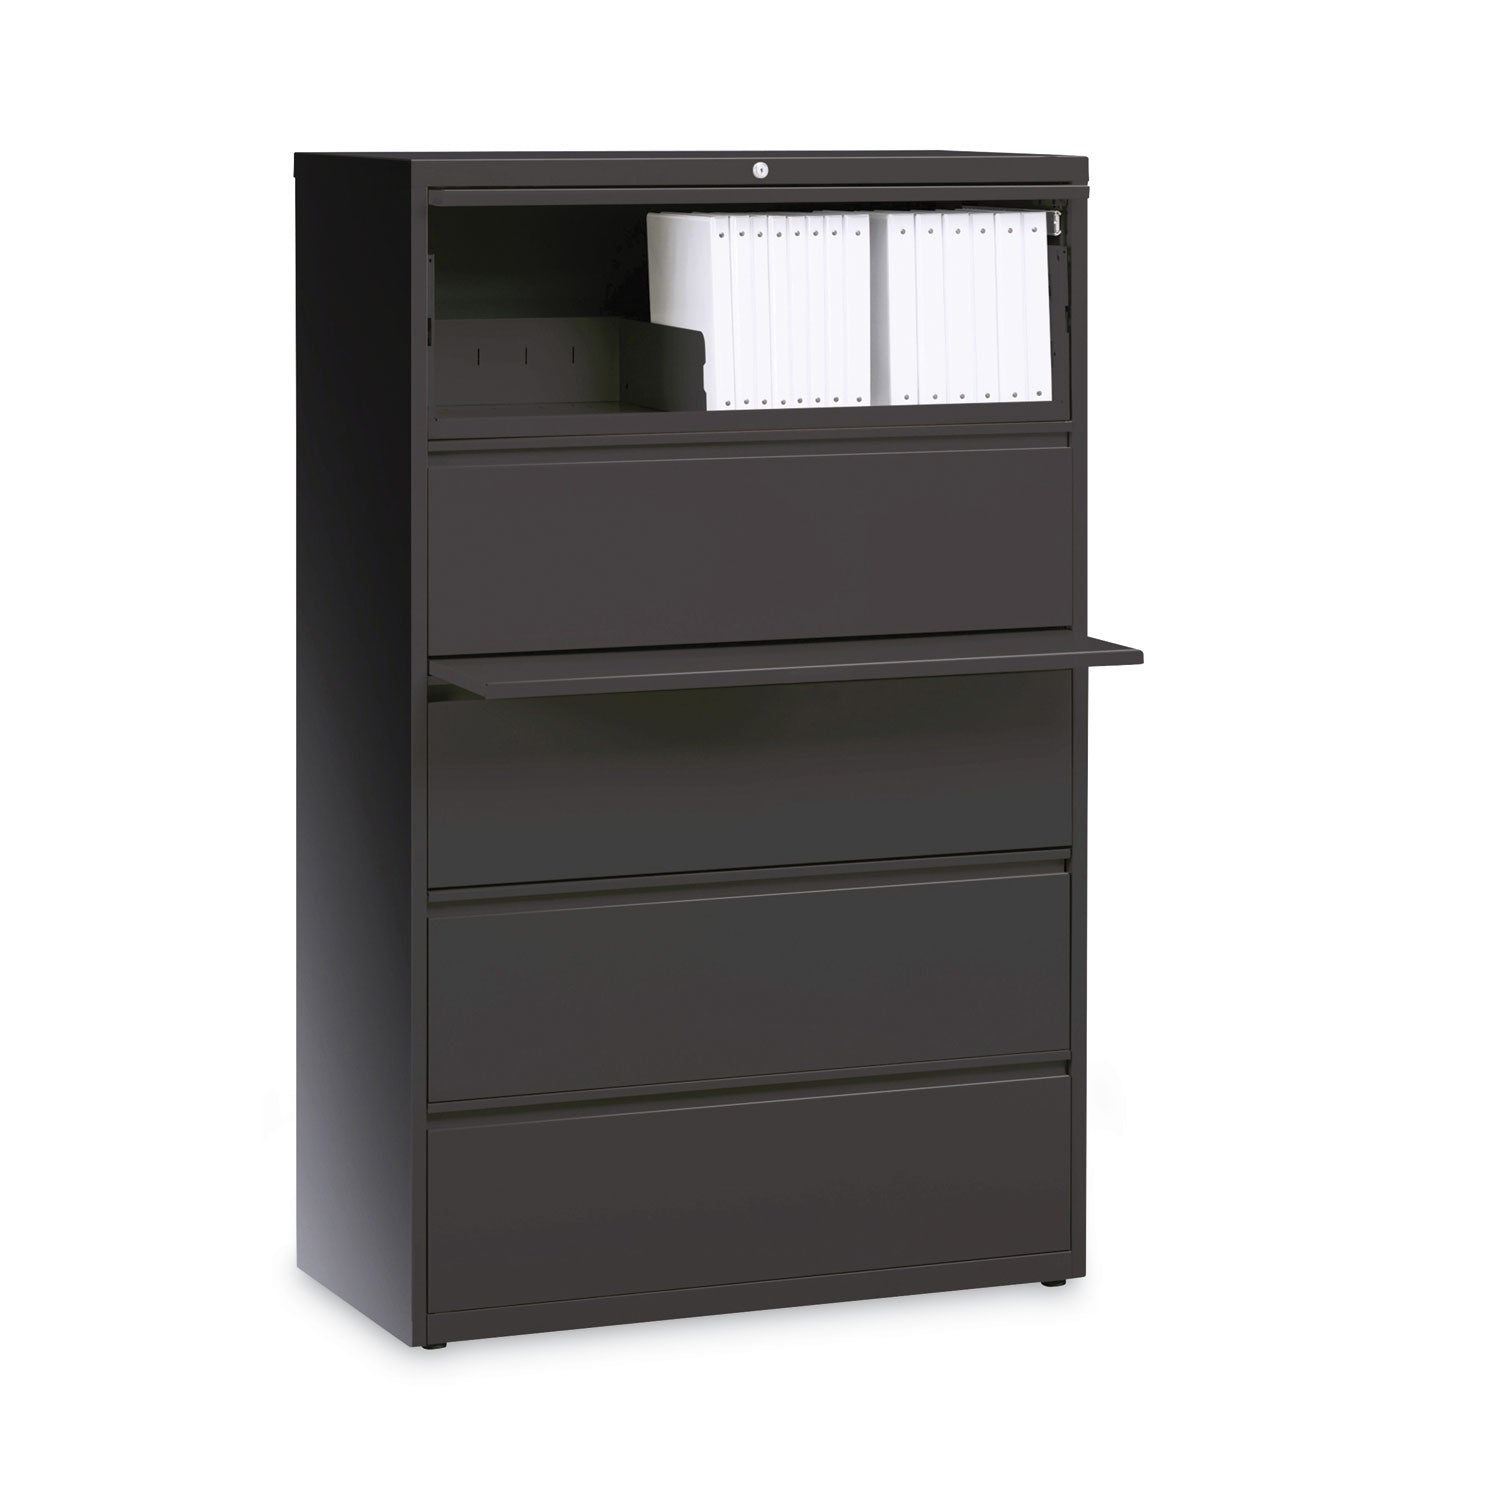 lateral-file-cabinet-5-letter-legal-a4-size-file-drawers-charcoal-36-x-1862-x-6762_hid16068 - 2